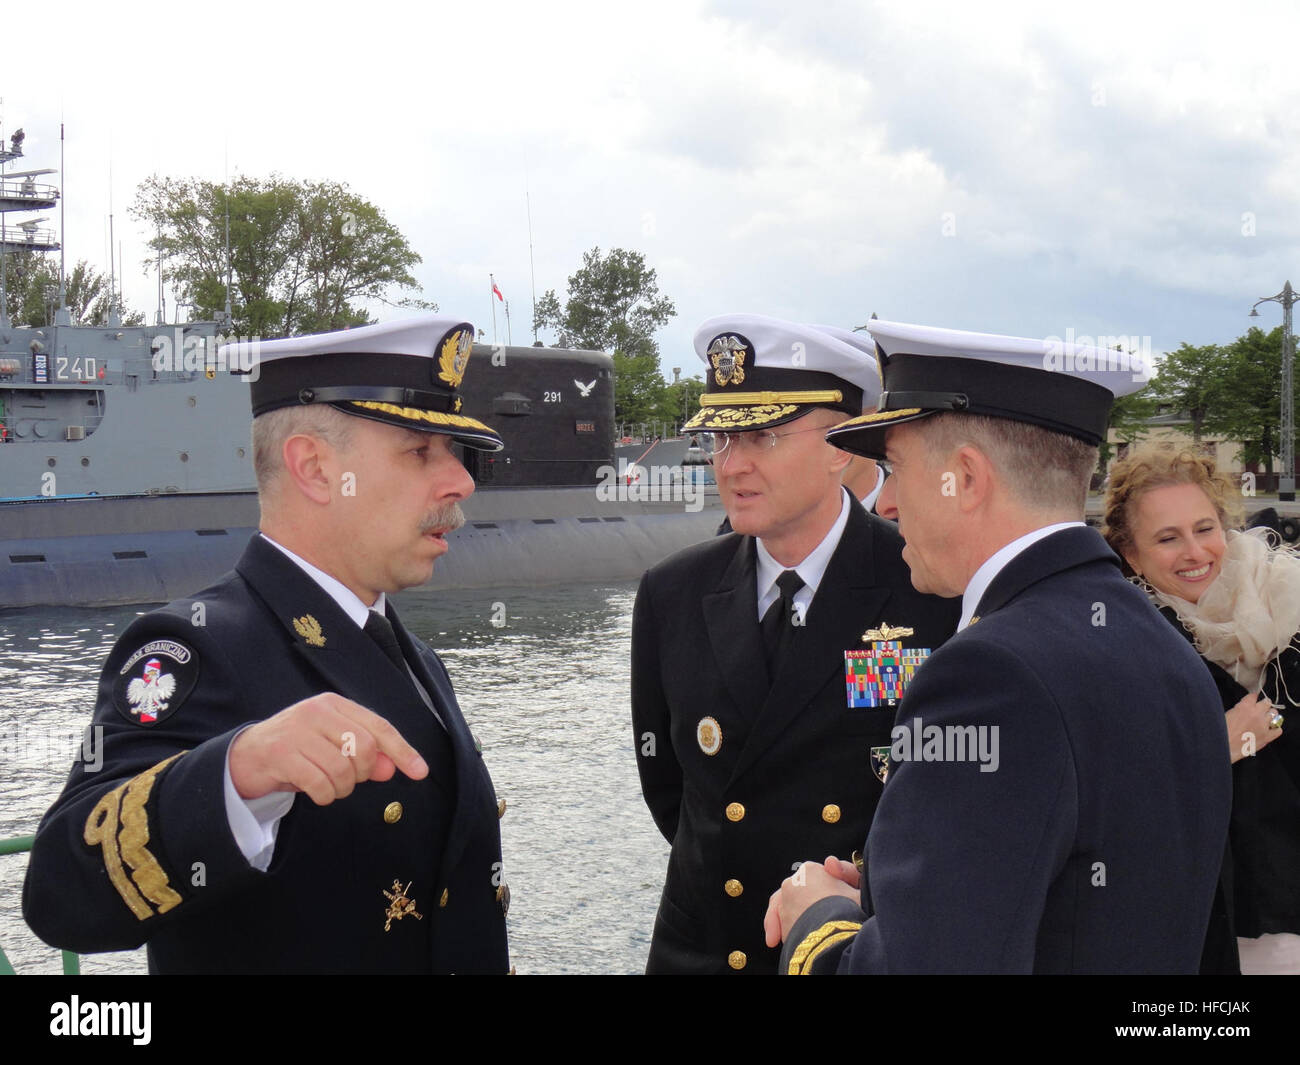 Polish Rear Adm. Piotr Stocki (left), commandant, Maritime Regional Unit of the Polish Border Guards, or 'Straz Graniczna', briefs U.S. Navy Vice Adm. Frank C. Pandolfe (center), commander, U.S. SIXTH Fleet and commander, Striking and Support Forces NATO, along with Polish Rear Adm. Ryszard Demczuk (right), Polish Navy chief of Training, while touring facilities at Gdynia Naval Base during an official visit to Poland. Vice Adm. Pandolfe's visit coincided with the start of the largest international maritime exercise in the Baltic Sea, BALTOPS, which marks its 40th anniversary this year.  Partic Stock Photo